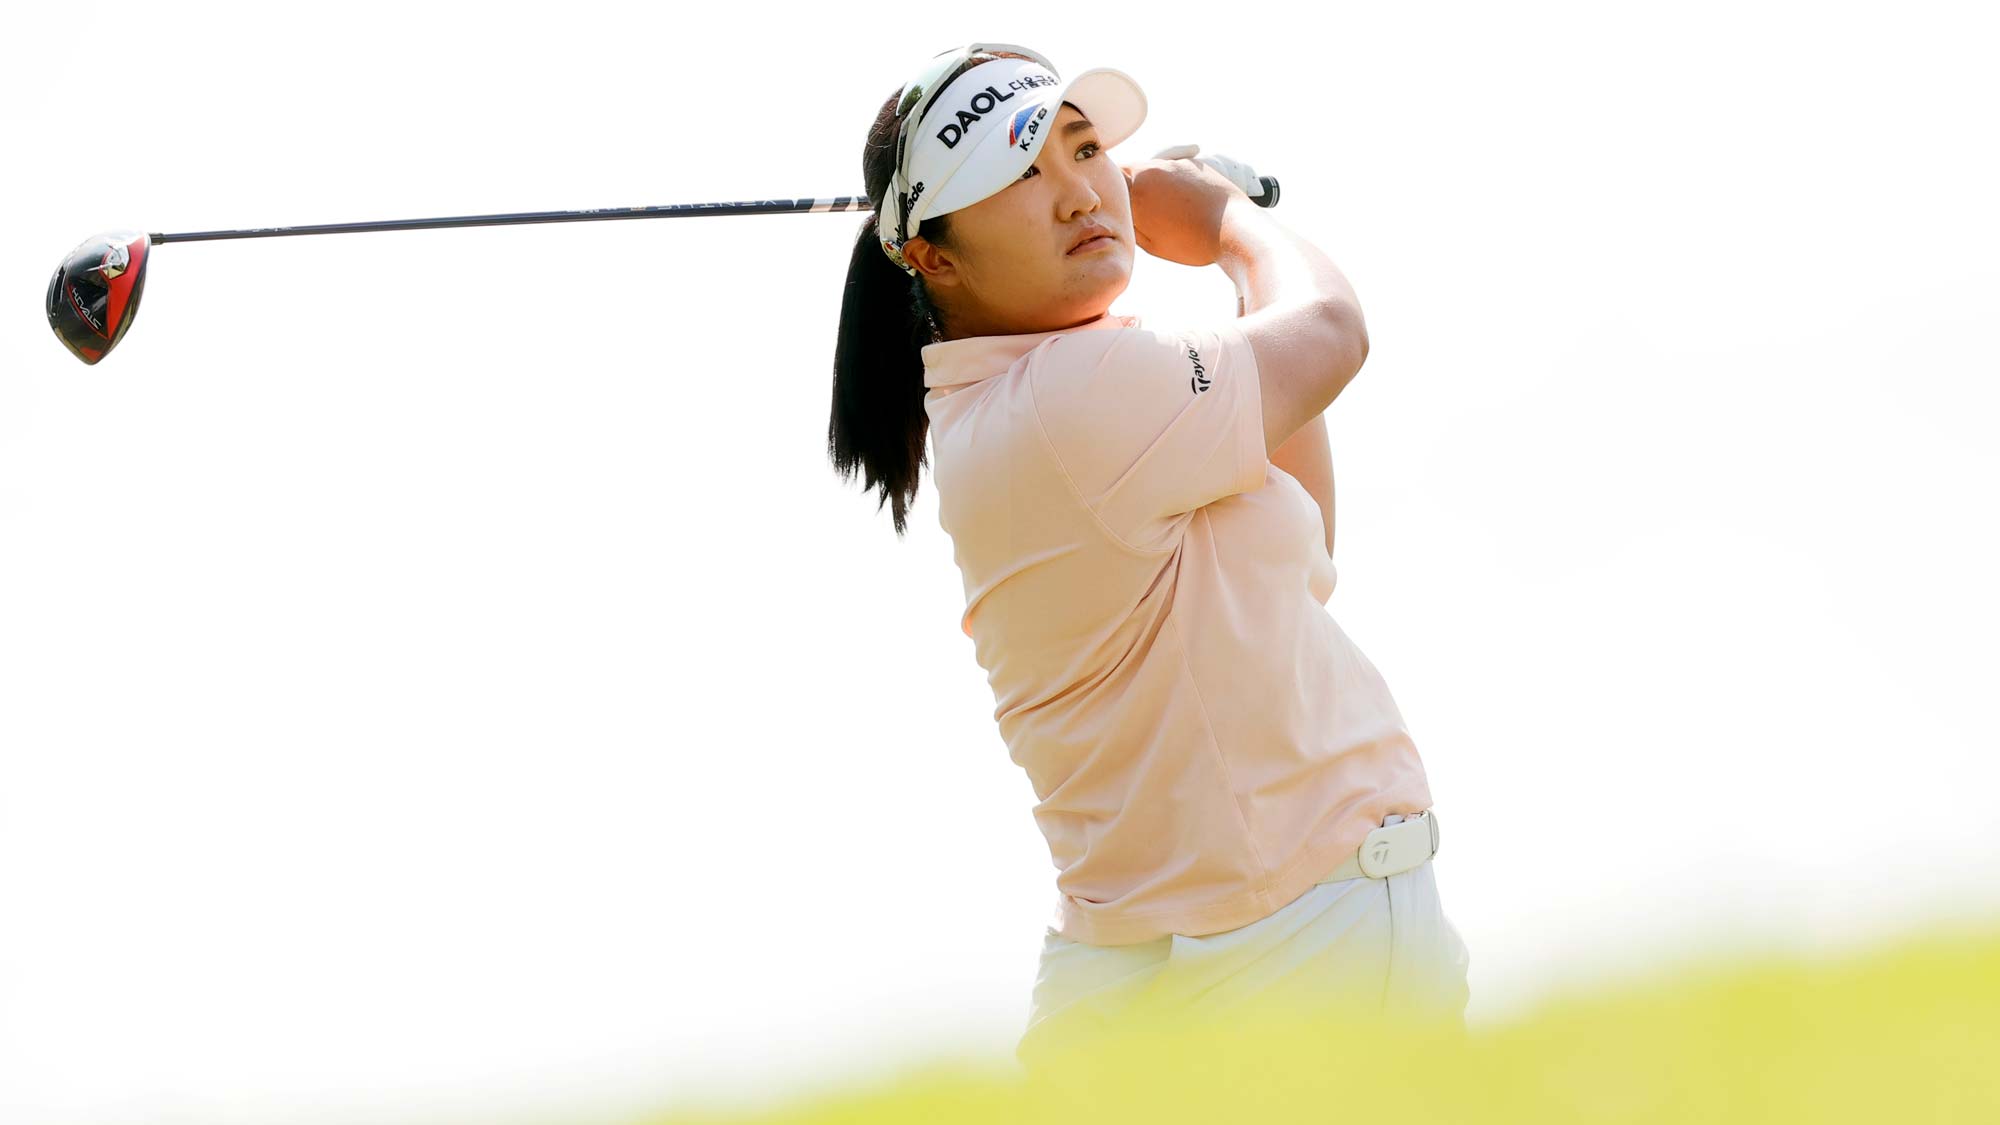 Hae Ran Ryu of South Korea plays her shot from the second tee during the Final round of the Walmart NW Arkansas Championship presented by P&G at Pinnacle Country Club